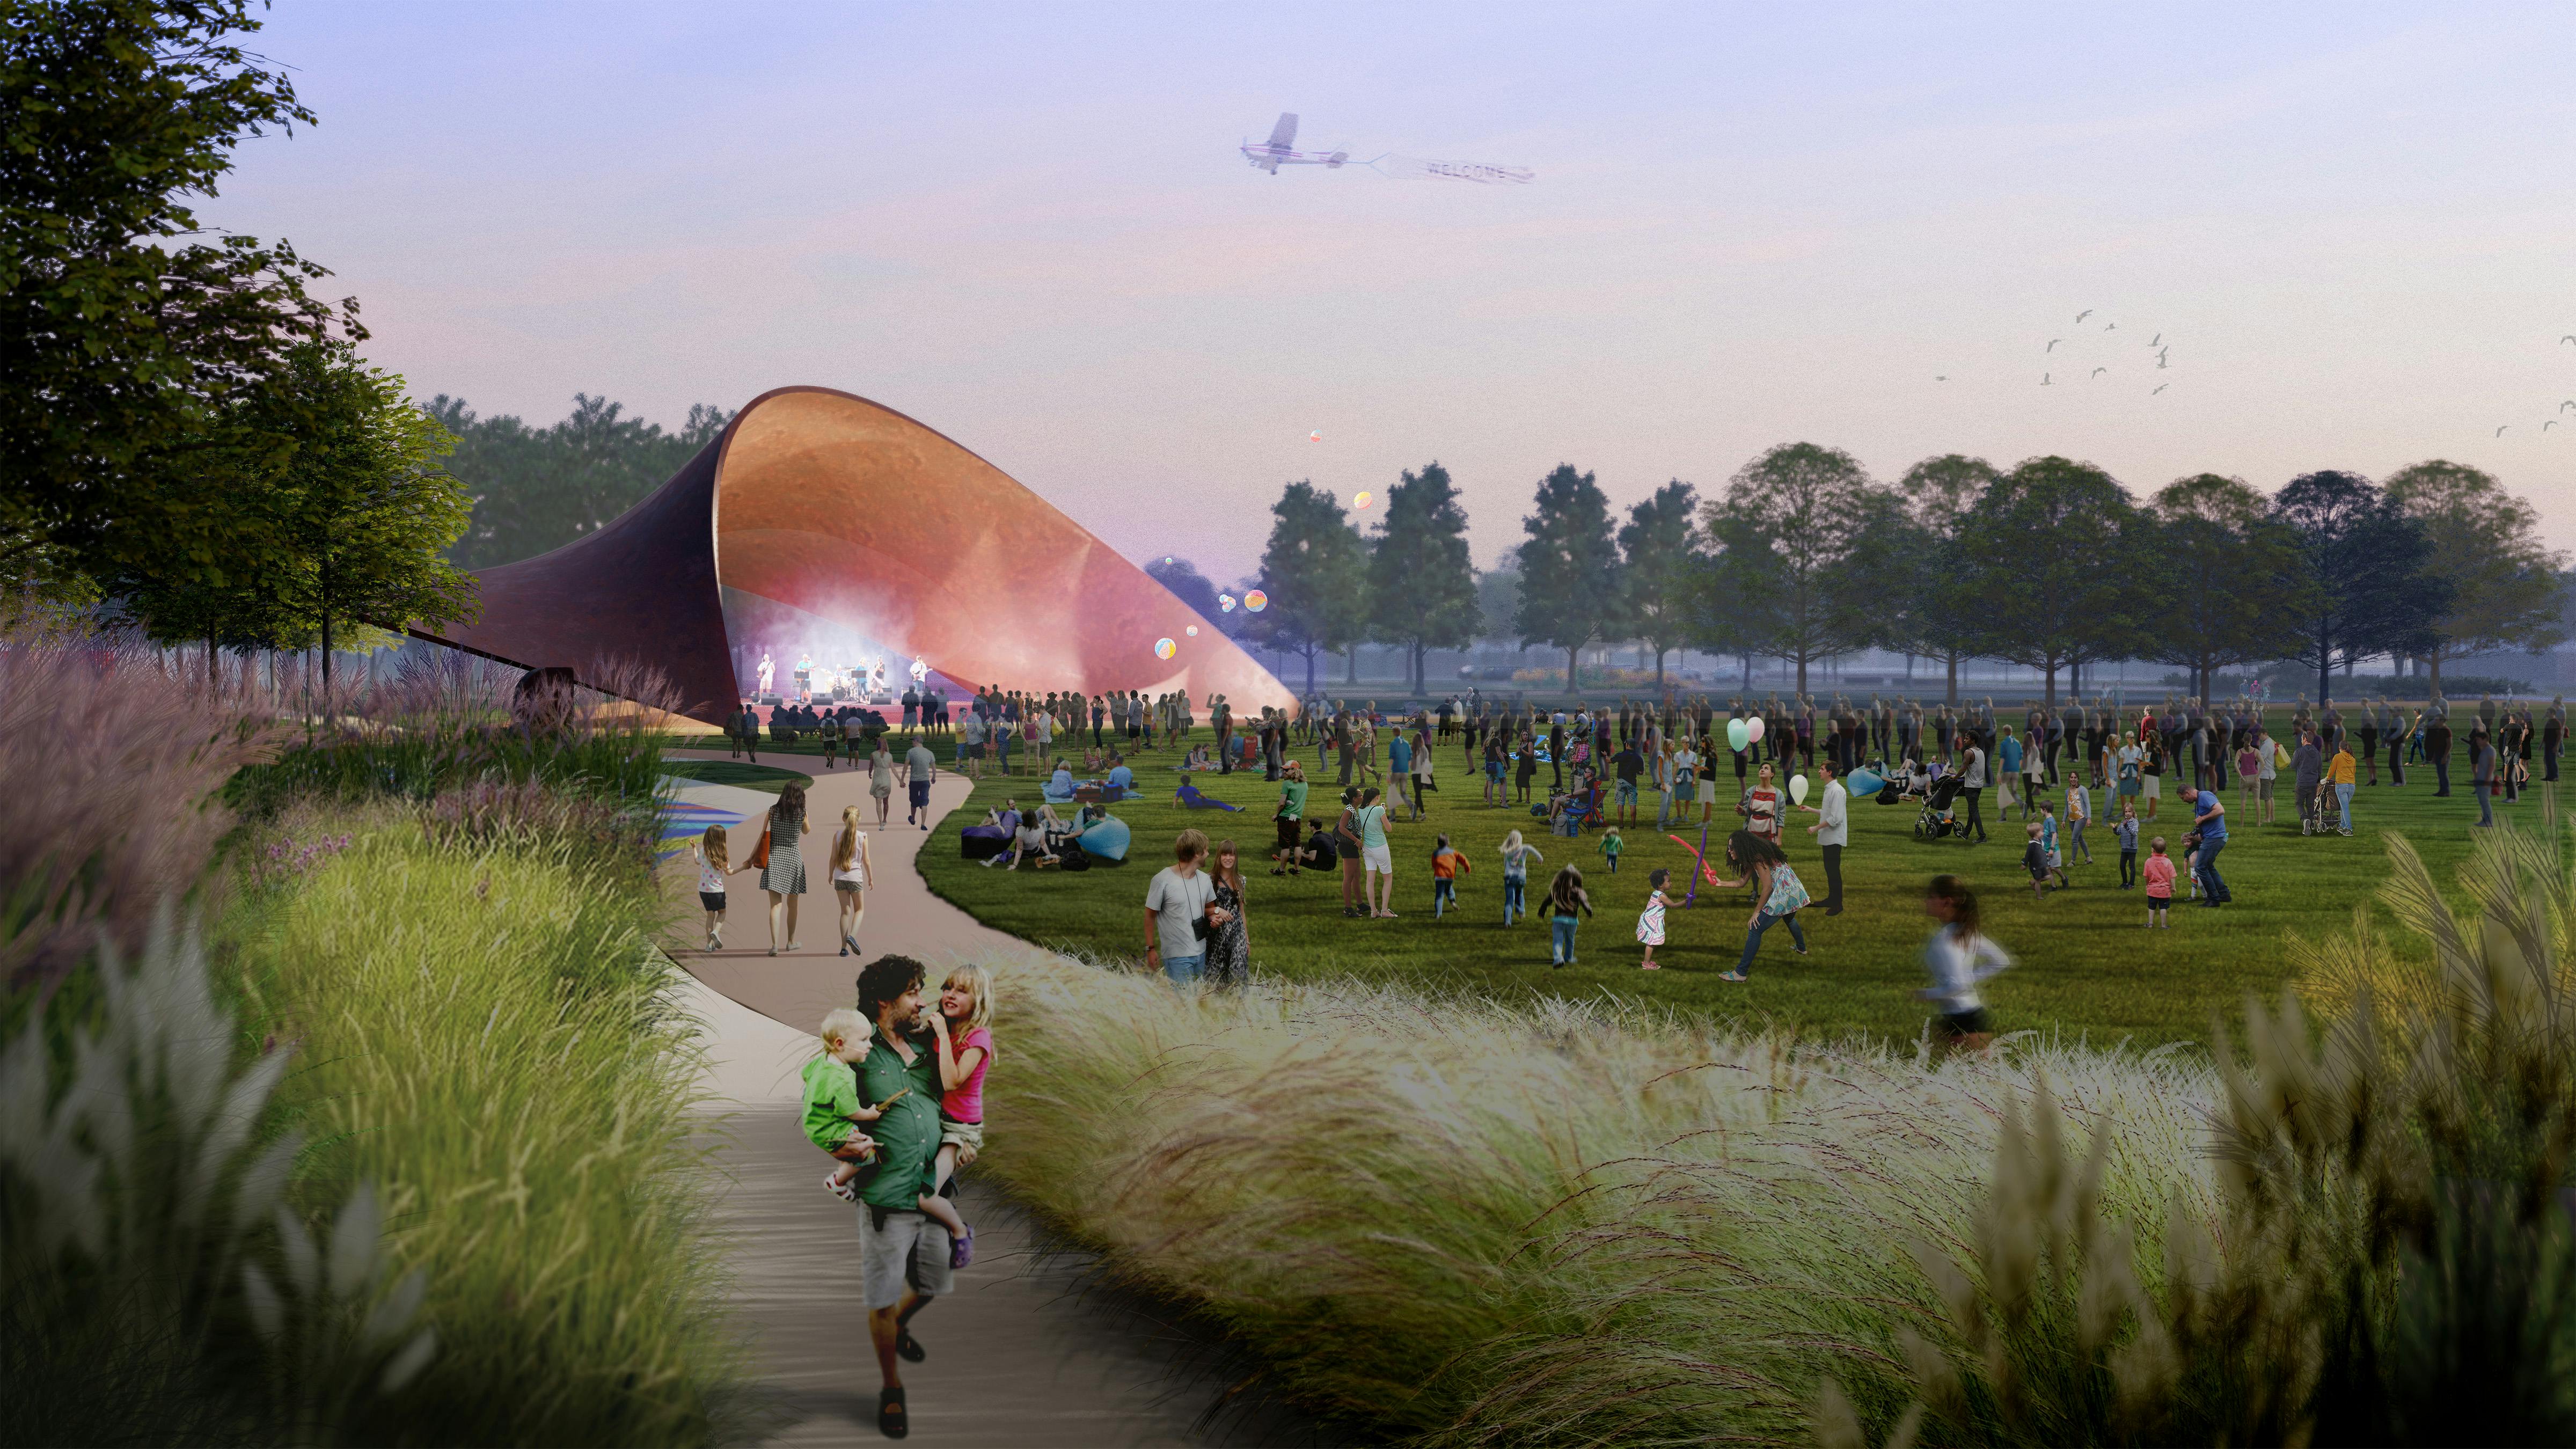 Sunset perspective rendering of concert at performance pavilion in the background, people gathered in front of pavilion sitting and standing in grass field.